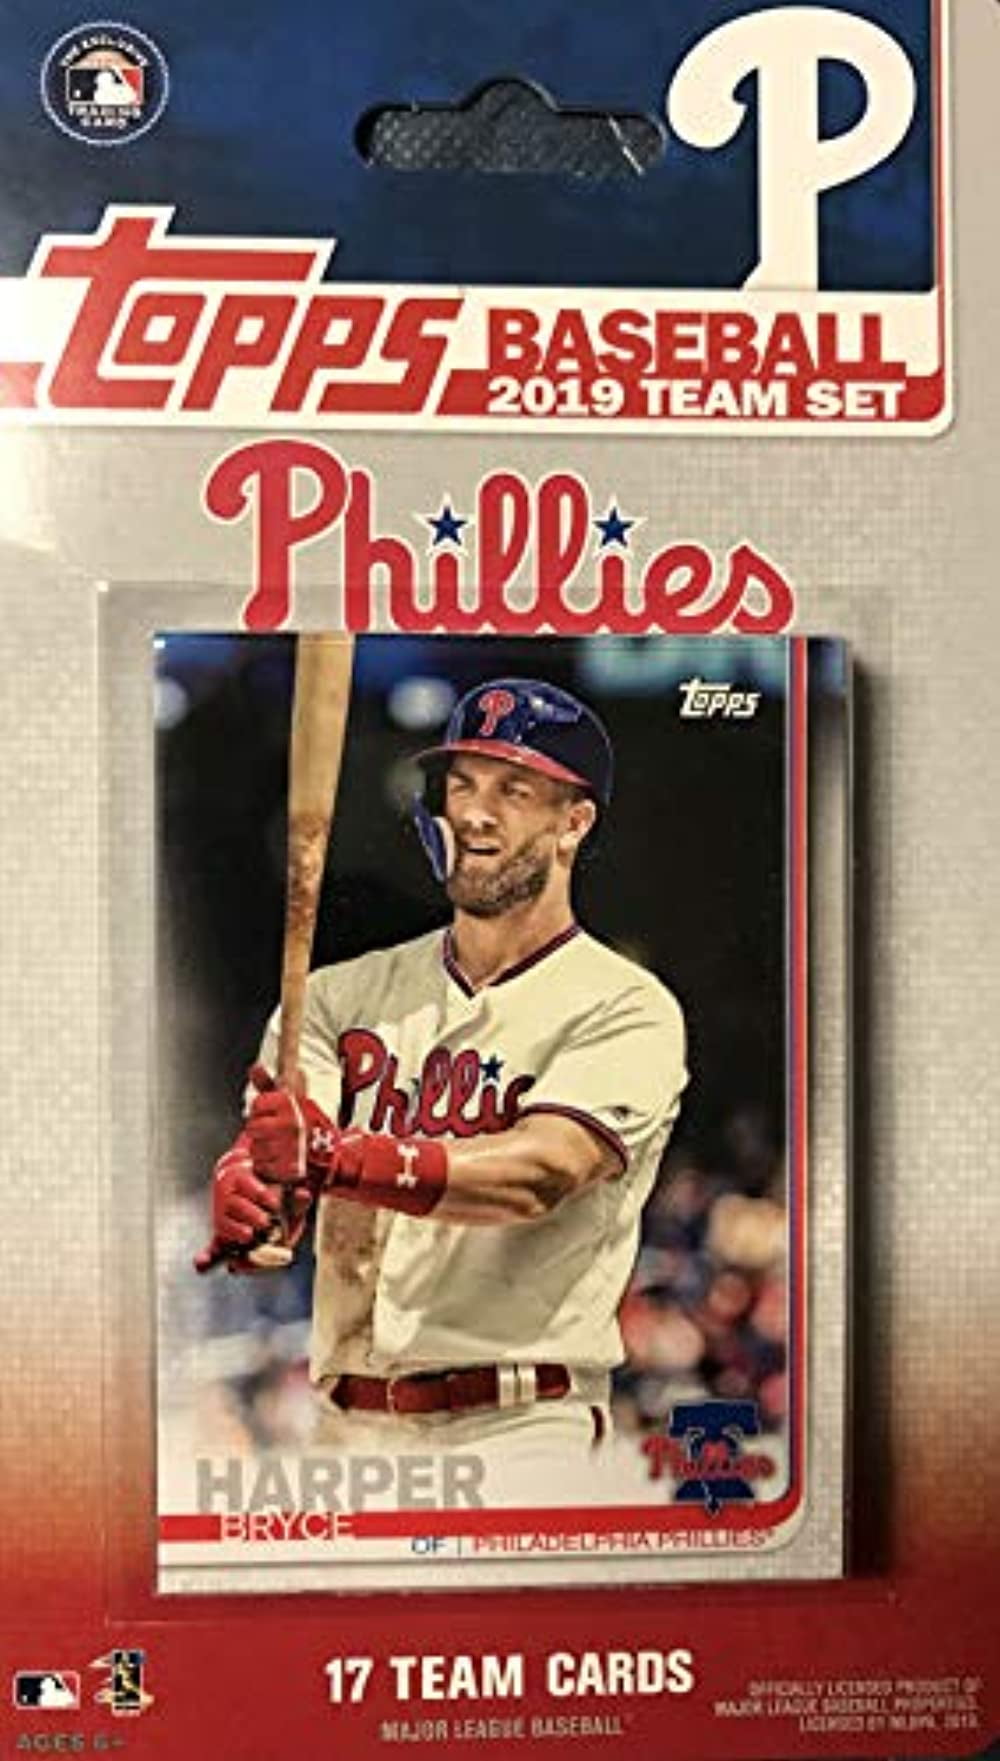 Fanatics Authentic Certified 2019 Topps Sticker Collection Baseball Factory Sealed 50 Pack Hobby Box